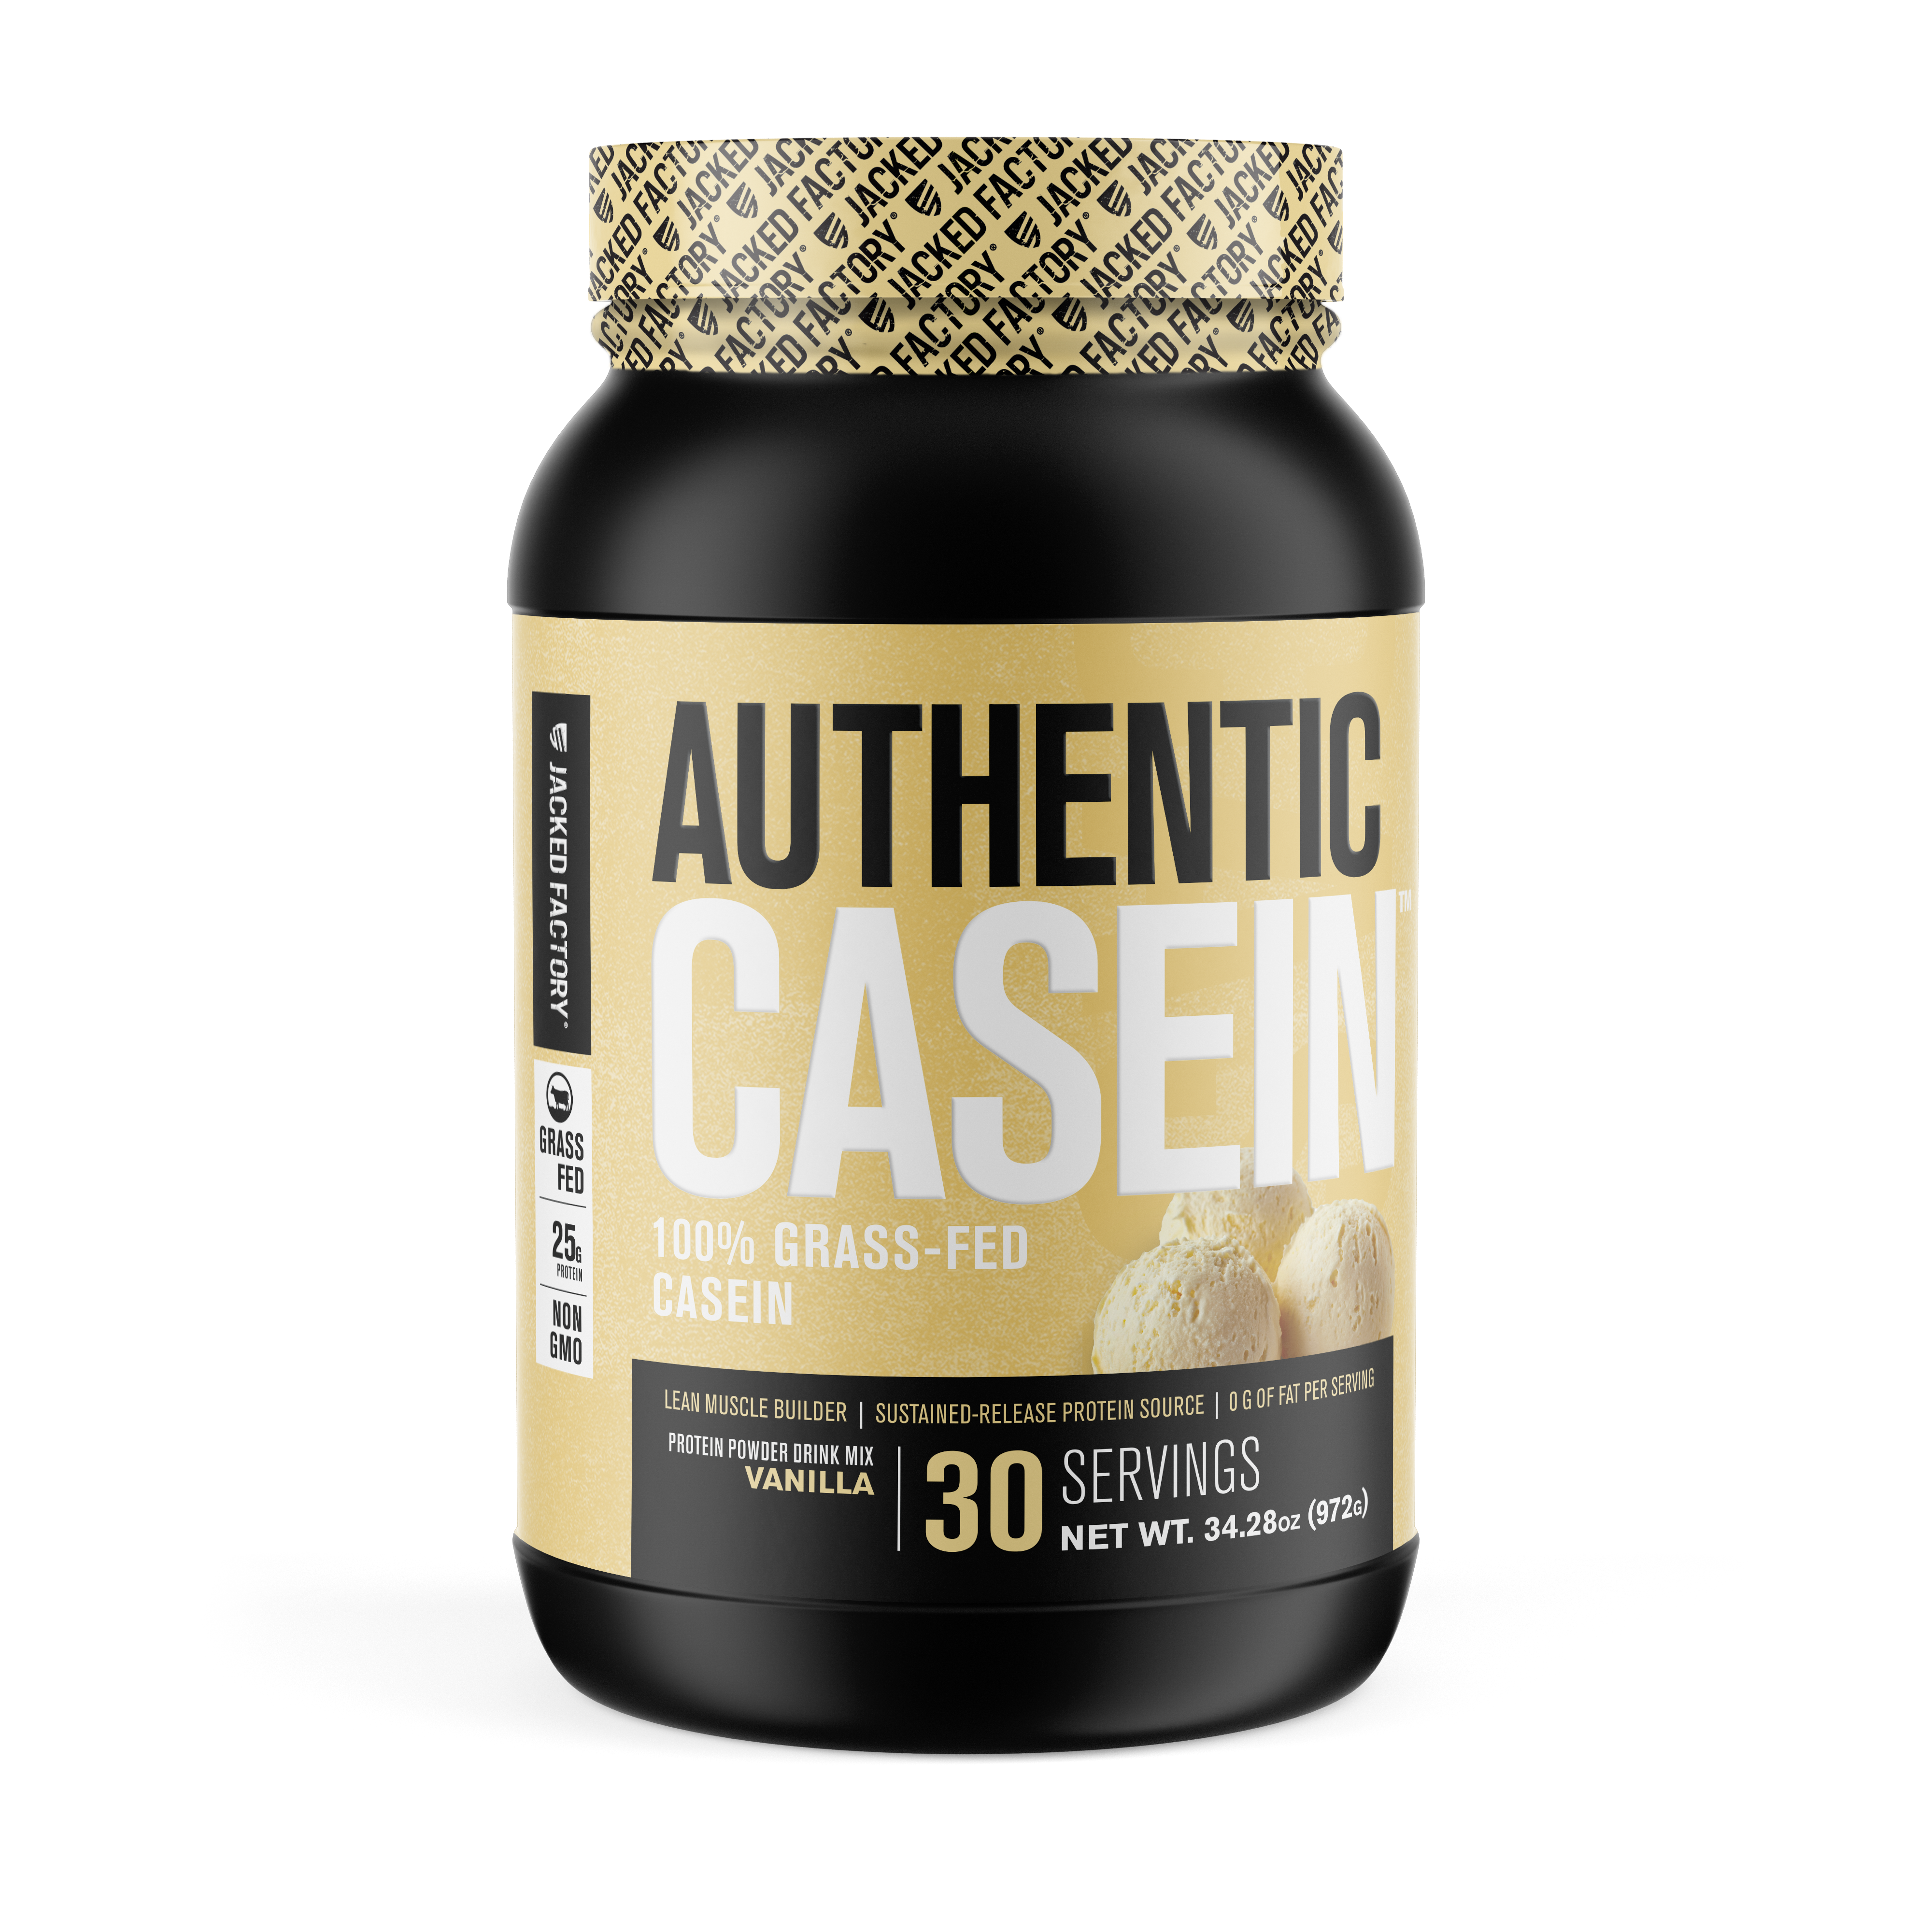 Authentic Casein by Jacked Factory